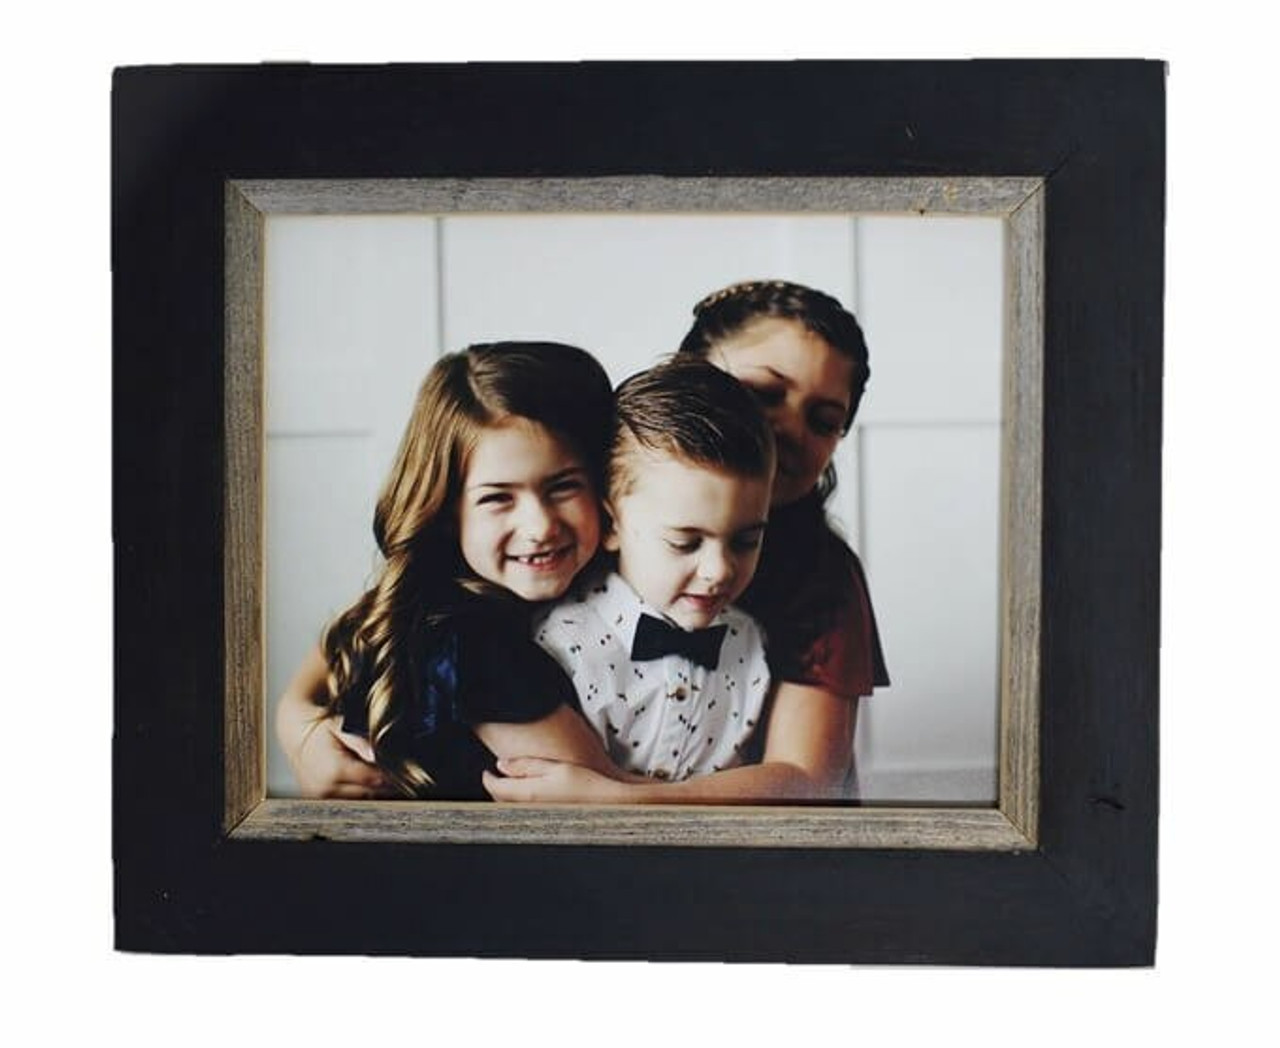 Rustic 8x8 Frame Black Picture Frame Wooden Home Decor Black Wall